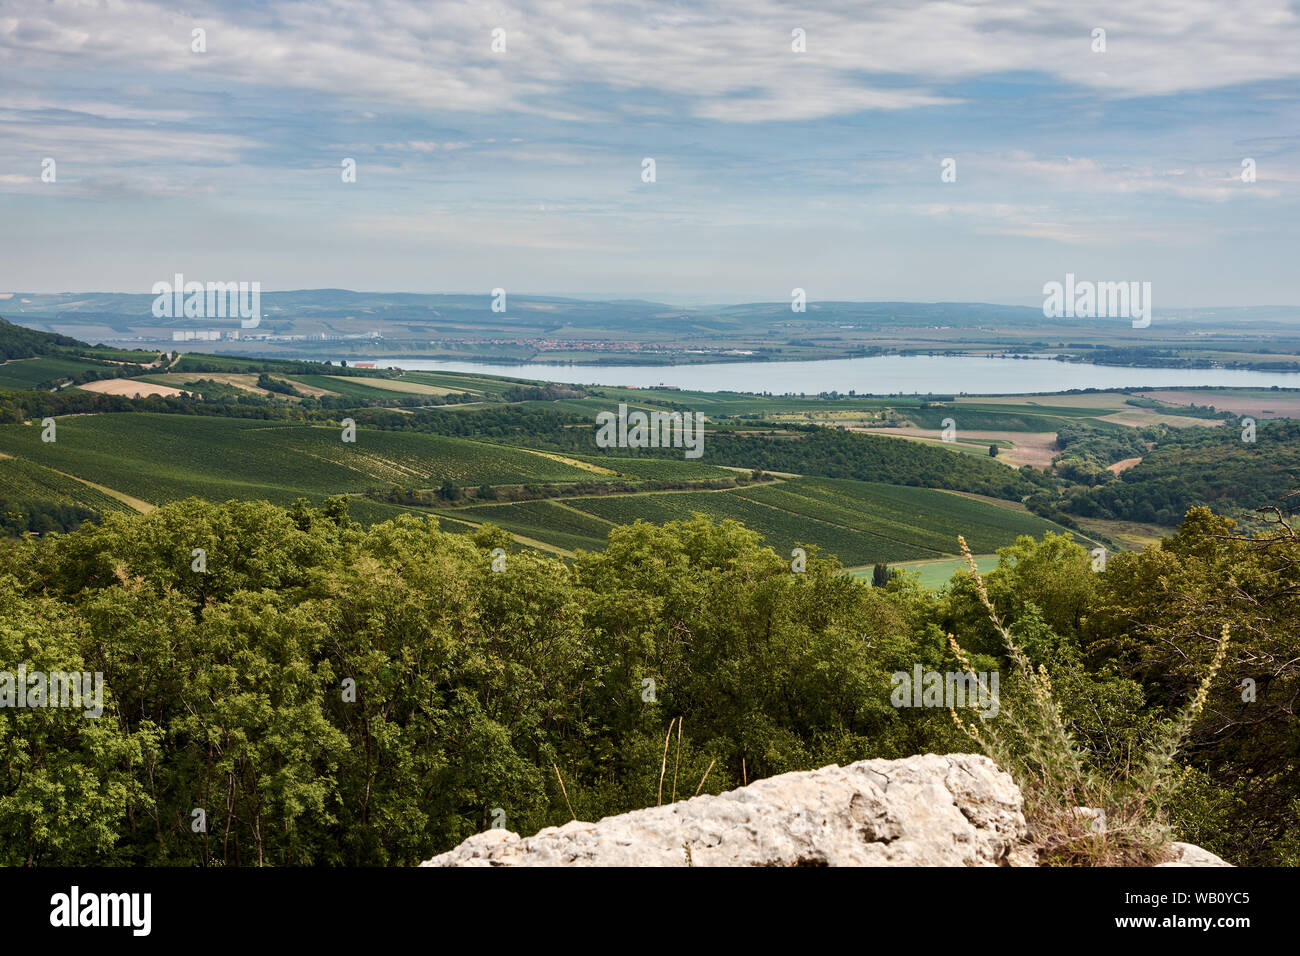 Landscape view of Palava in South Moravia. Lake Nove Mlyny and towns Pavlov and Klentnice under blue sky with clouds Stock Photo